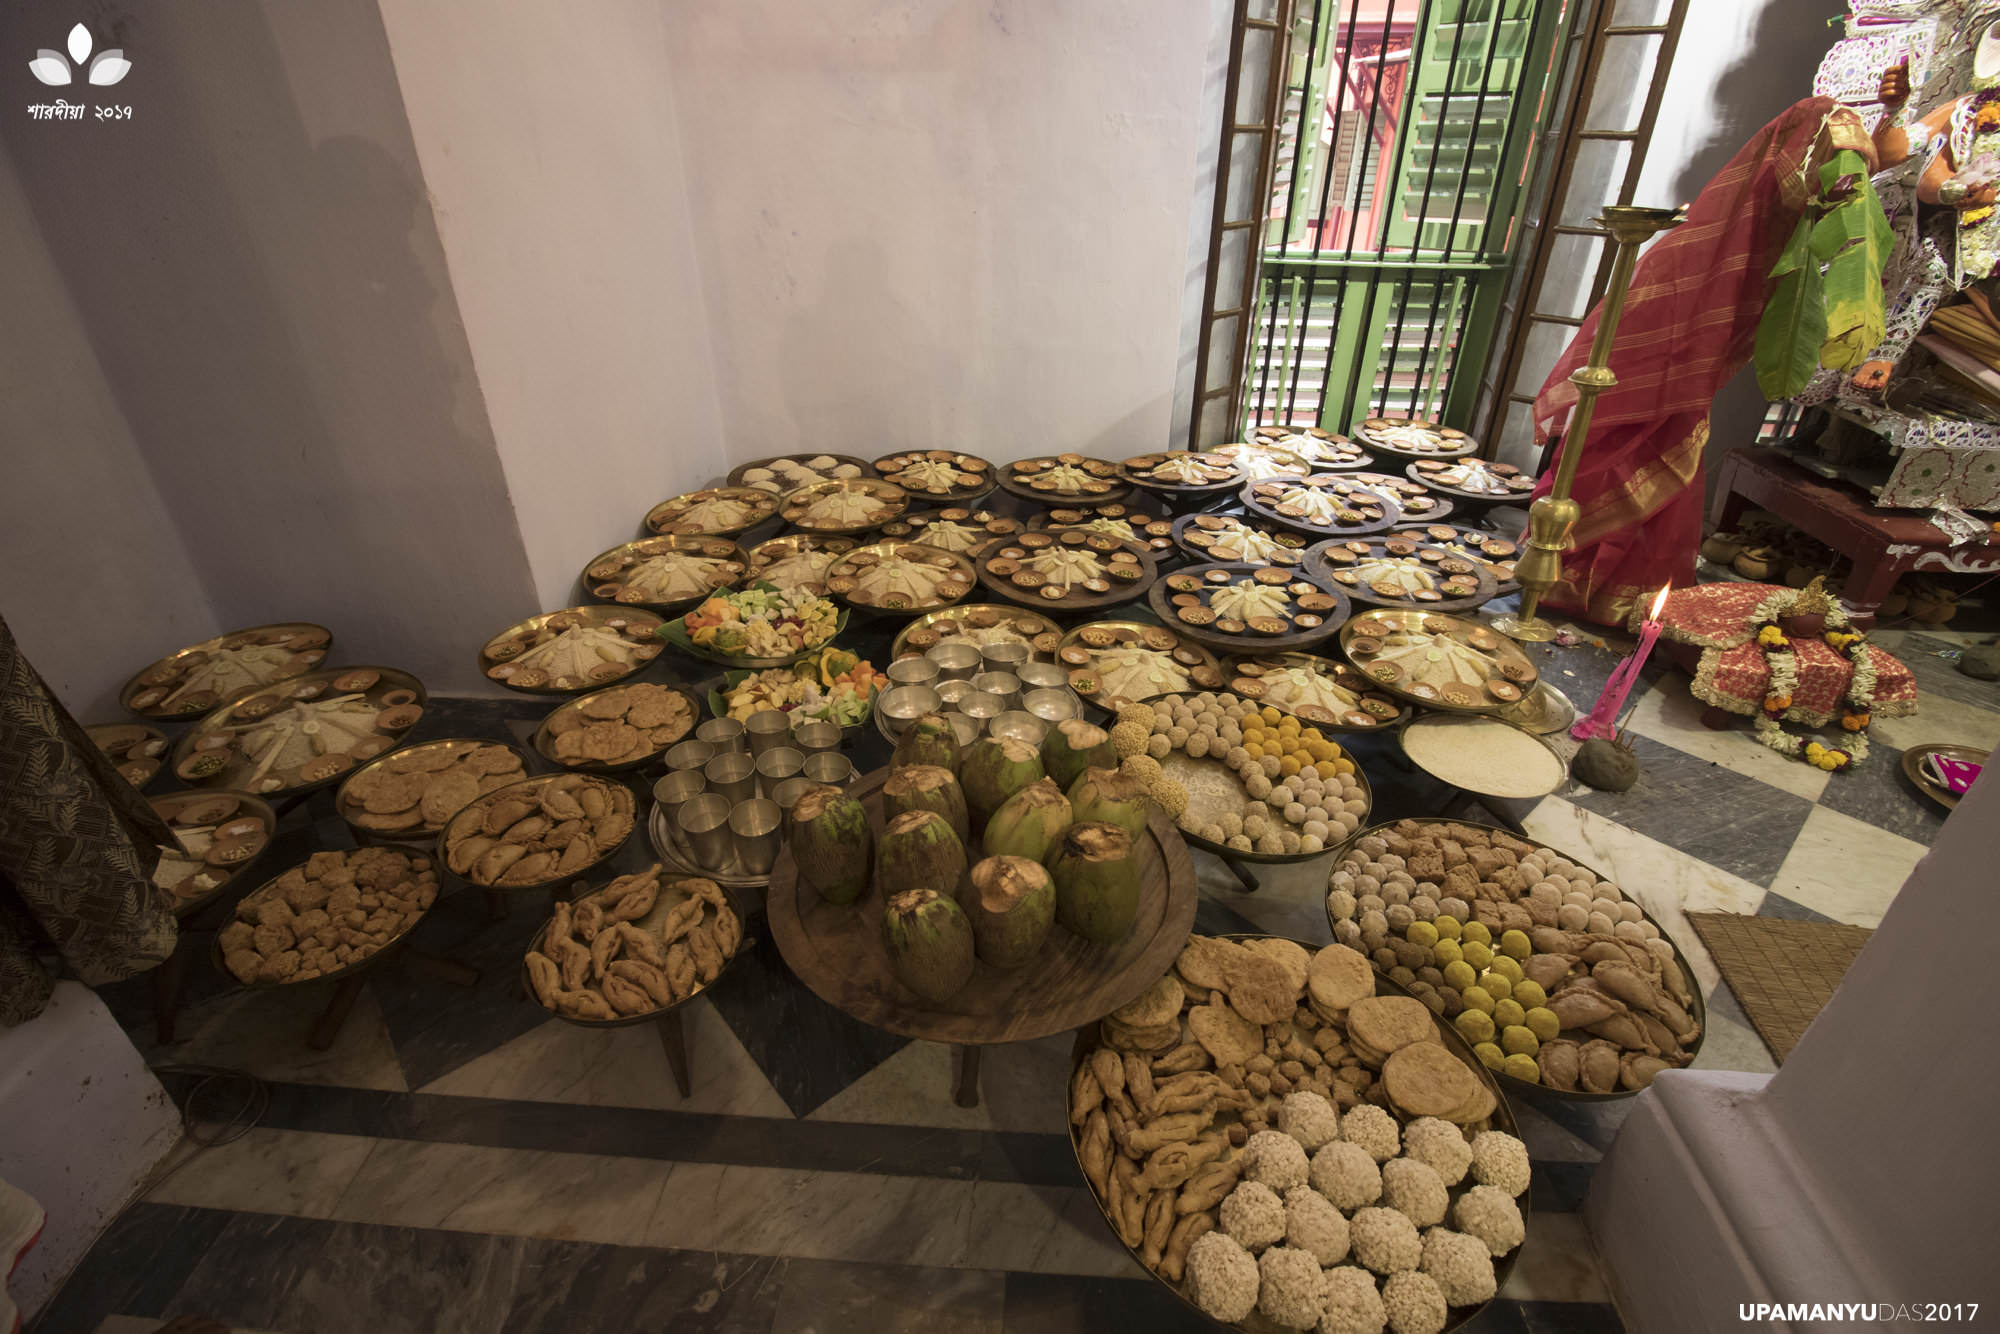 Laha Family's Puja, The Food for Offering